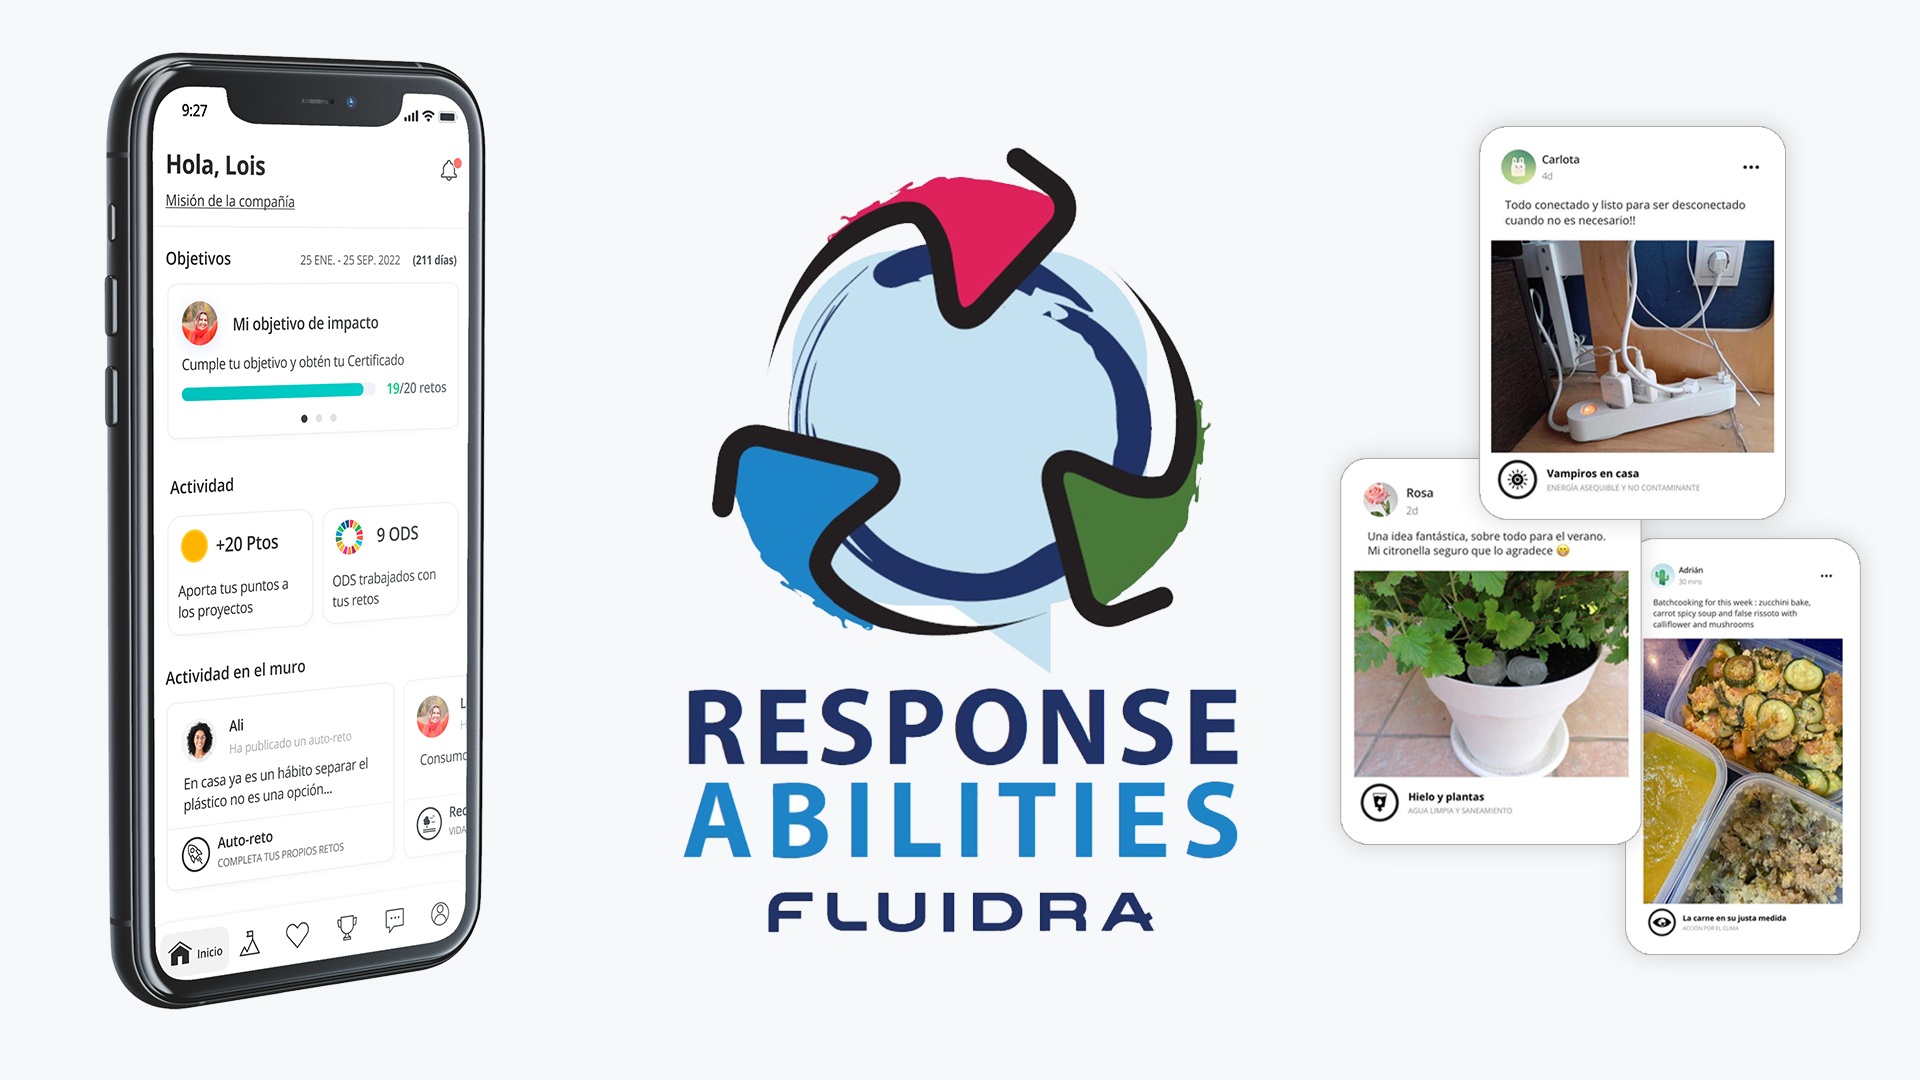 ResponseAbilities, Fluidra’s initiative that unites all of its companies in its sustainability drive